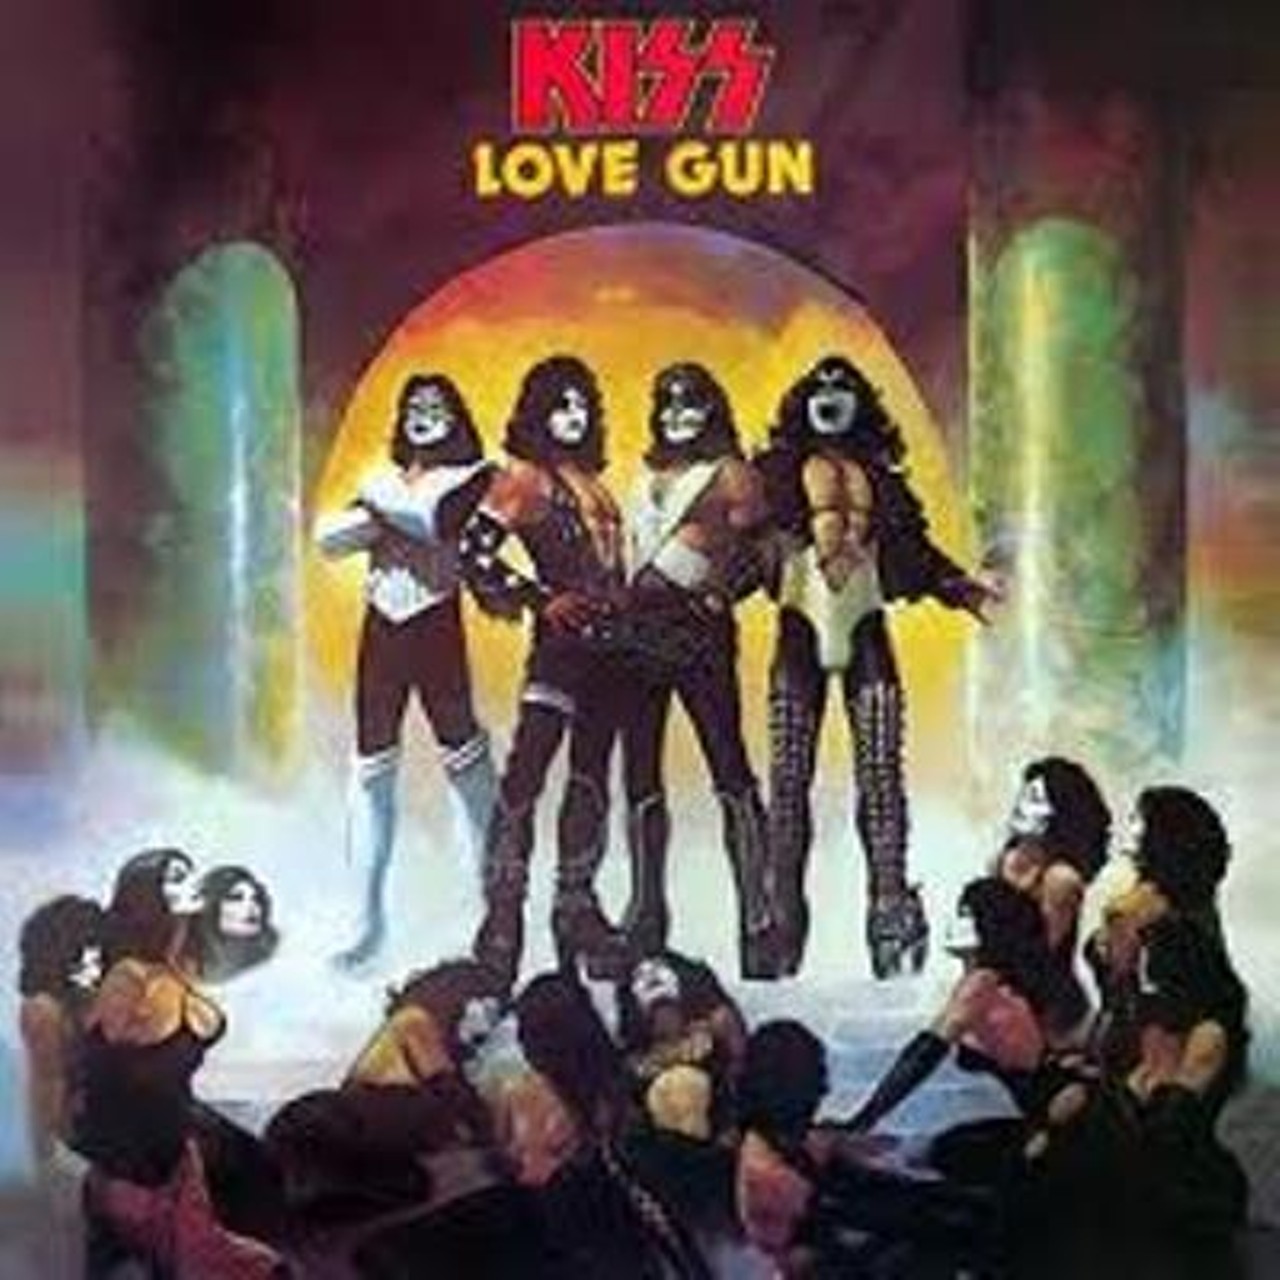 Love Gun marks the end of an era. Following the release of this album, the band would start to fragment and become less consistent as the group tried to expand its commercial appeal by experimenting with other sounds like disco . . . Love Gun is a really good KISS record, complete with plenty of classics like “Christine Sixteen,” “Shock Me,” “I Stole Your Love,” “Plaster Caster” and the title track.